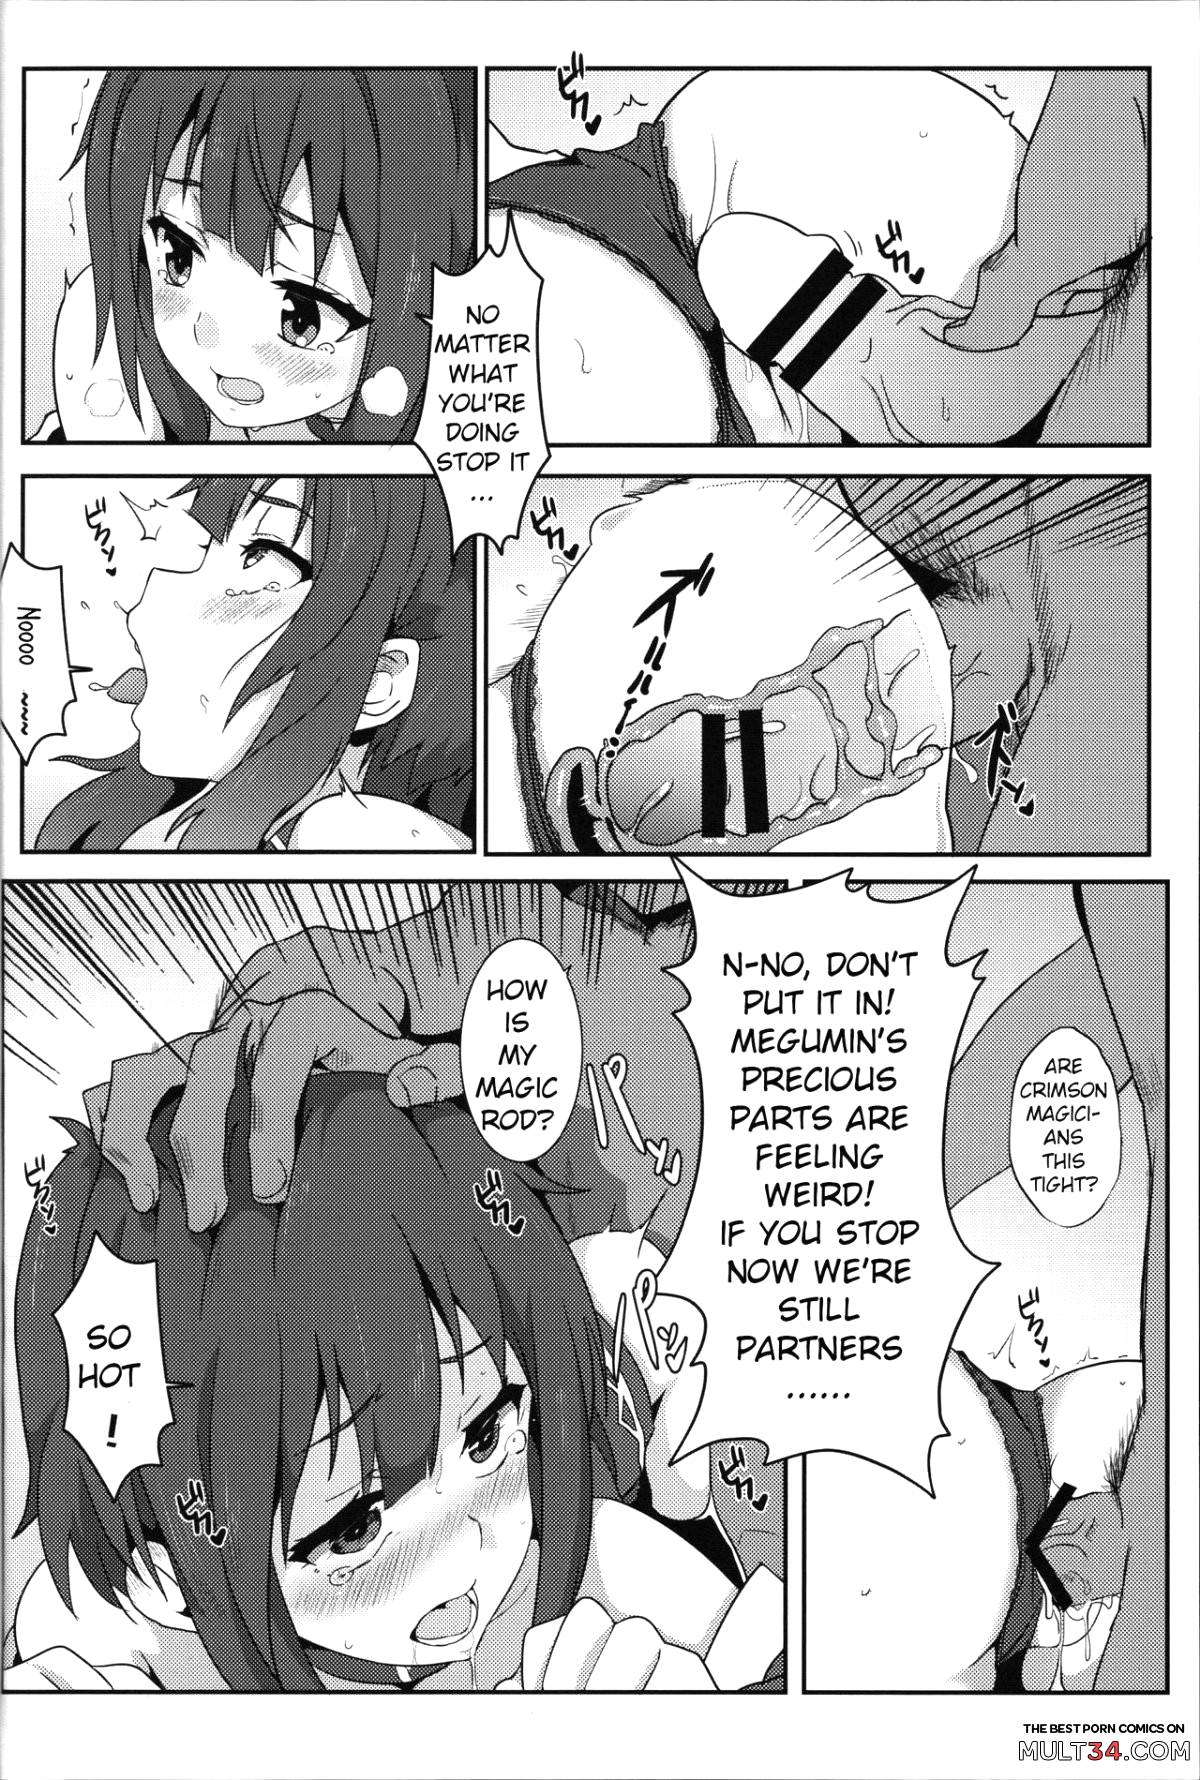 Blessing Megumin with a Magnificence Explosion! page 10